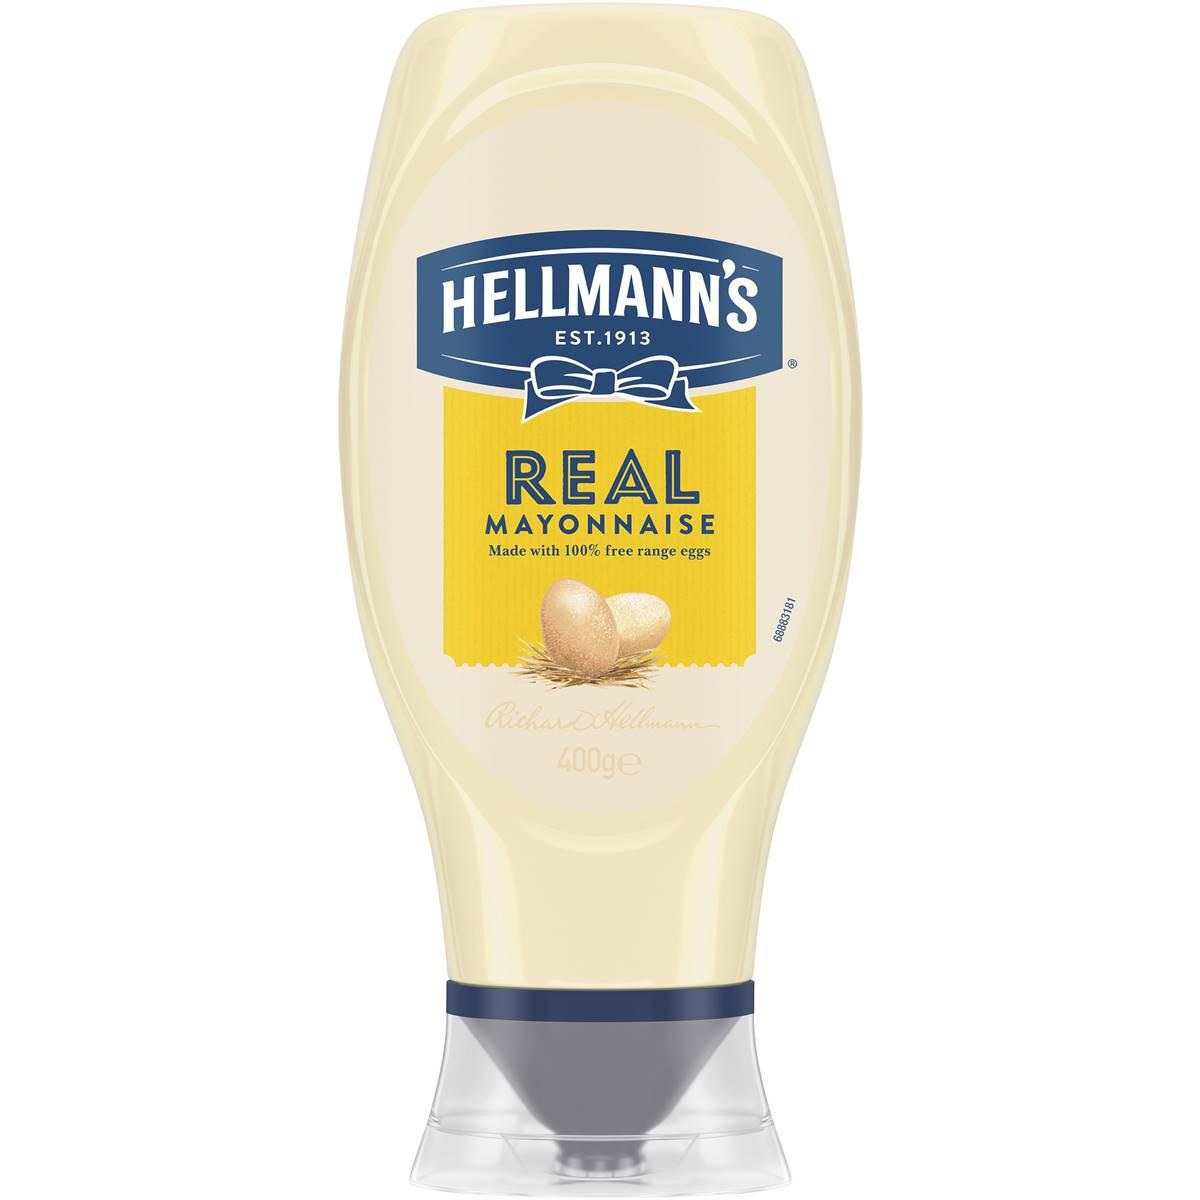 Hellmann's Real Mayonnaise Squeeze 400g